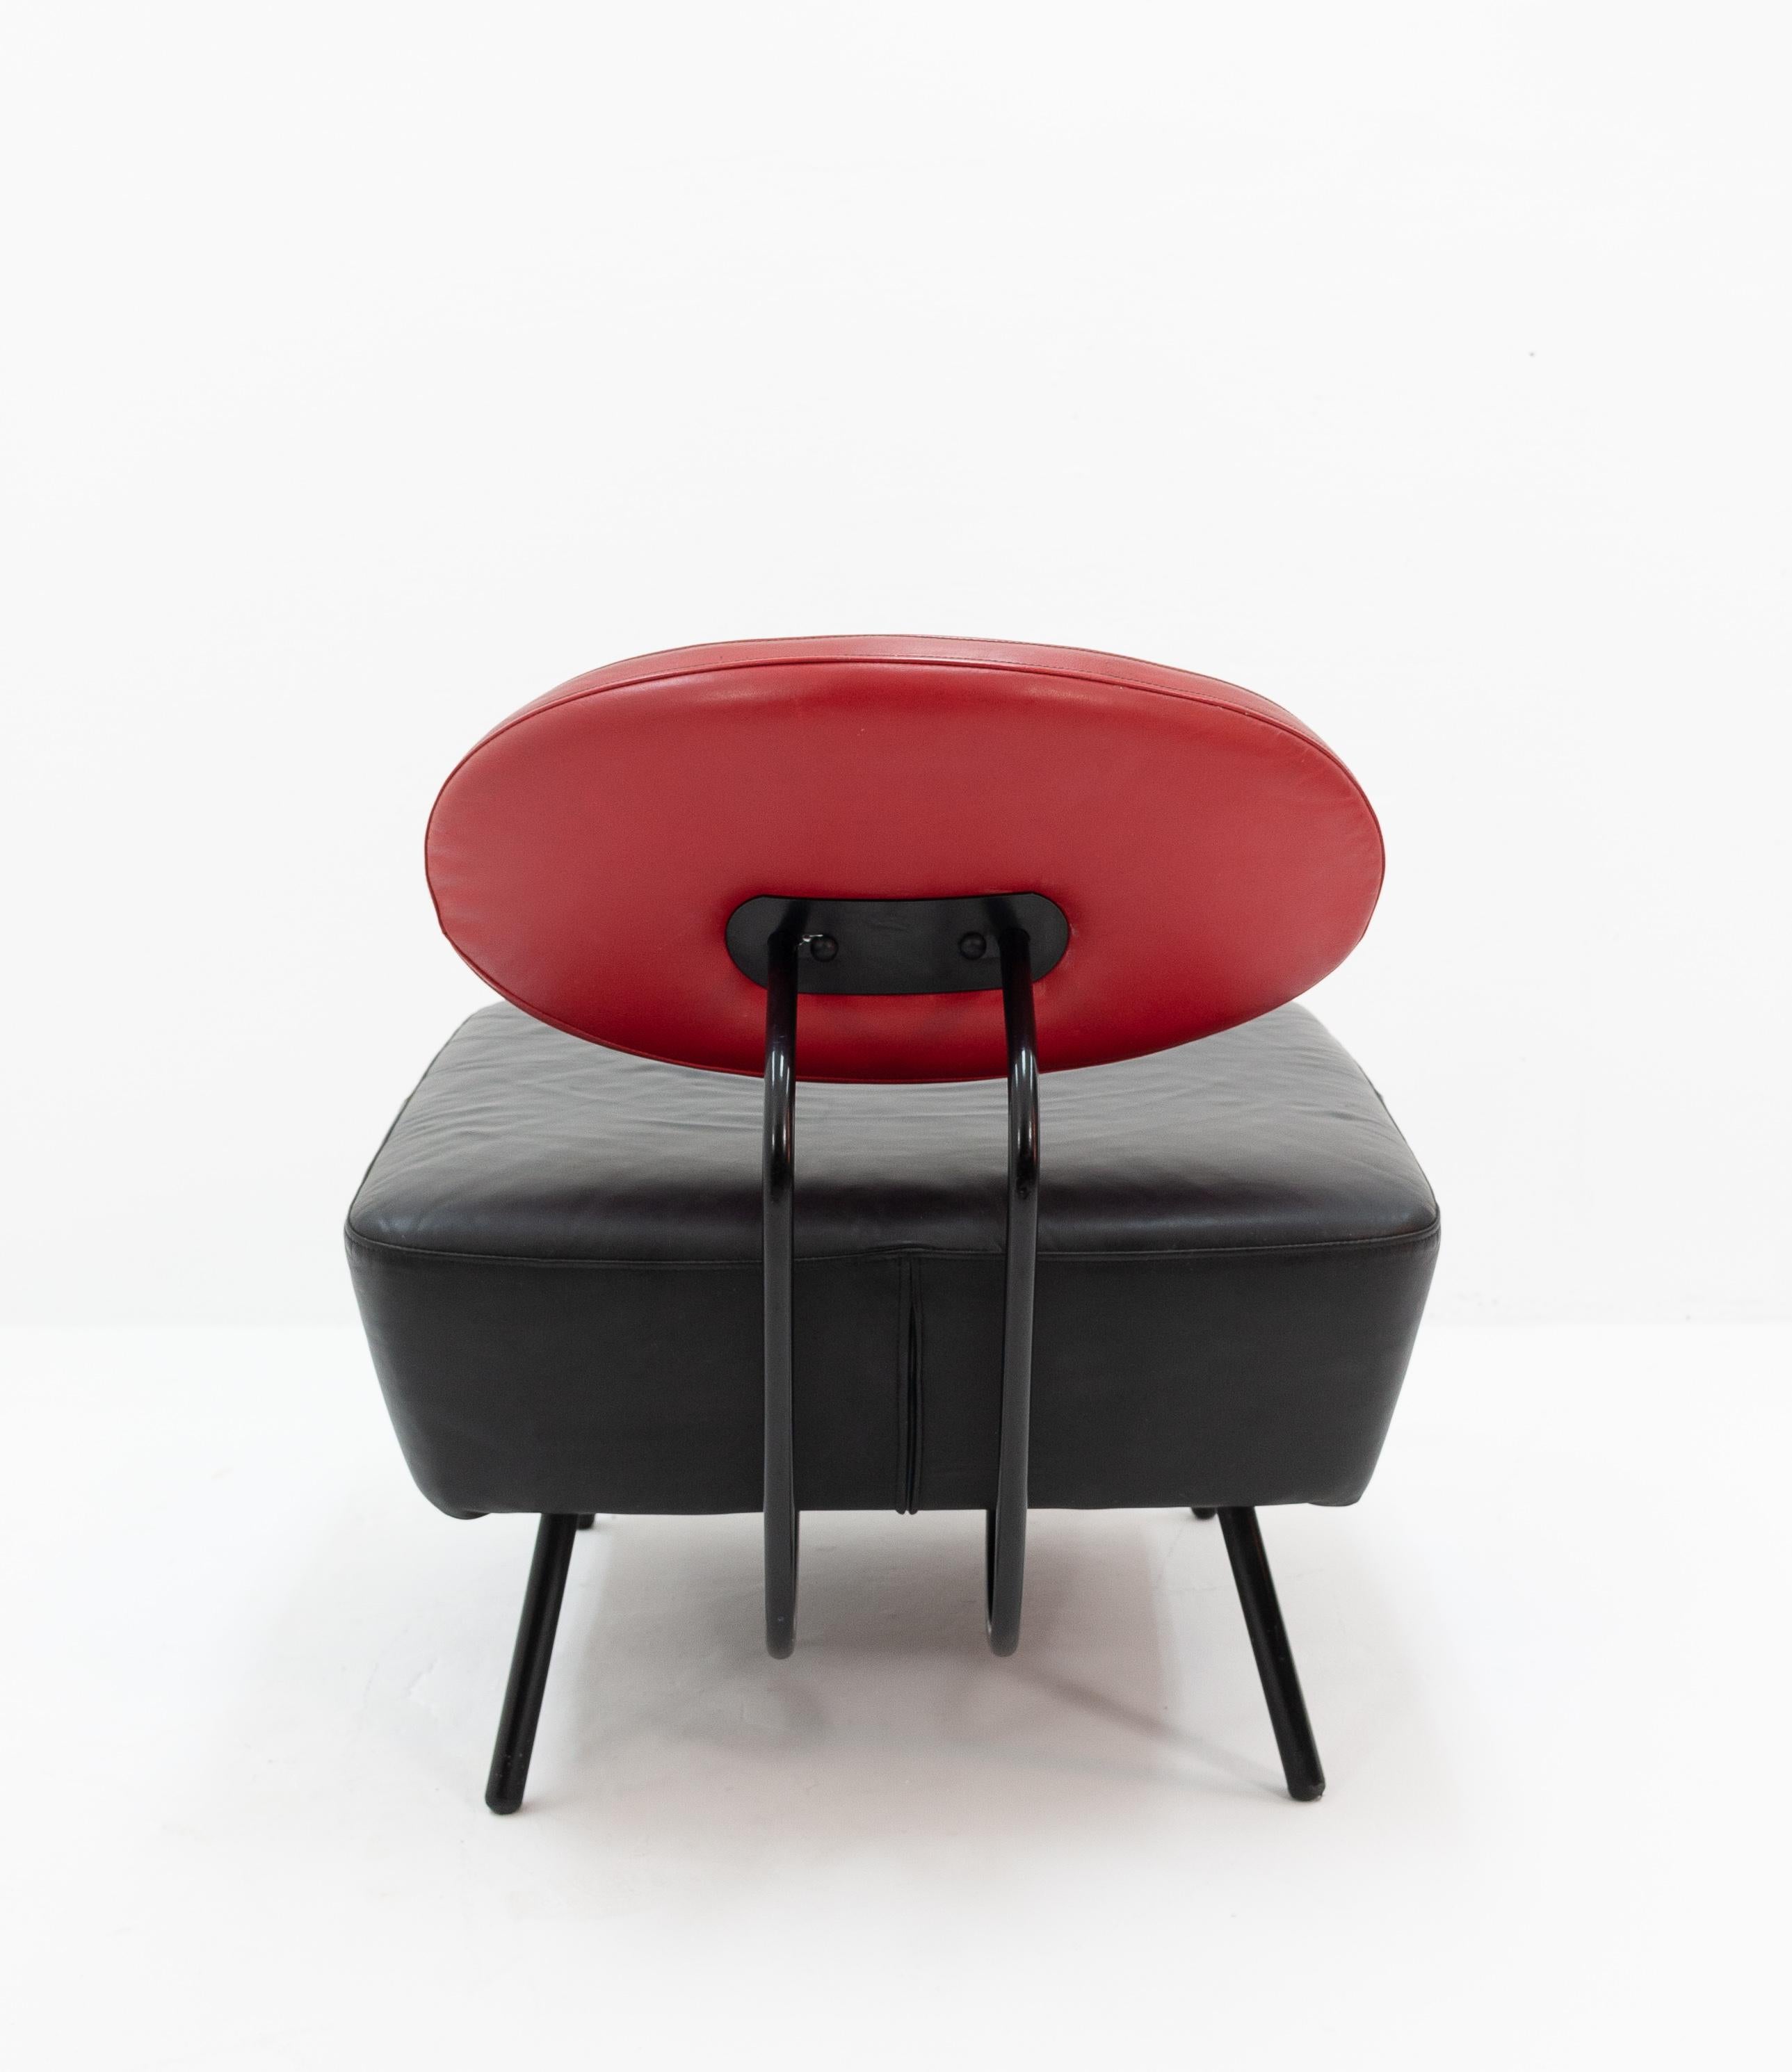 Dutch Black on Red Leather Lounge Chair by Staccato Van IQ for Multifoam